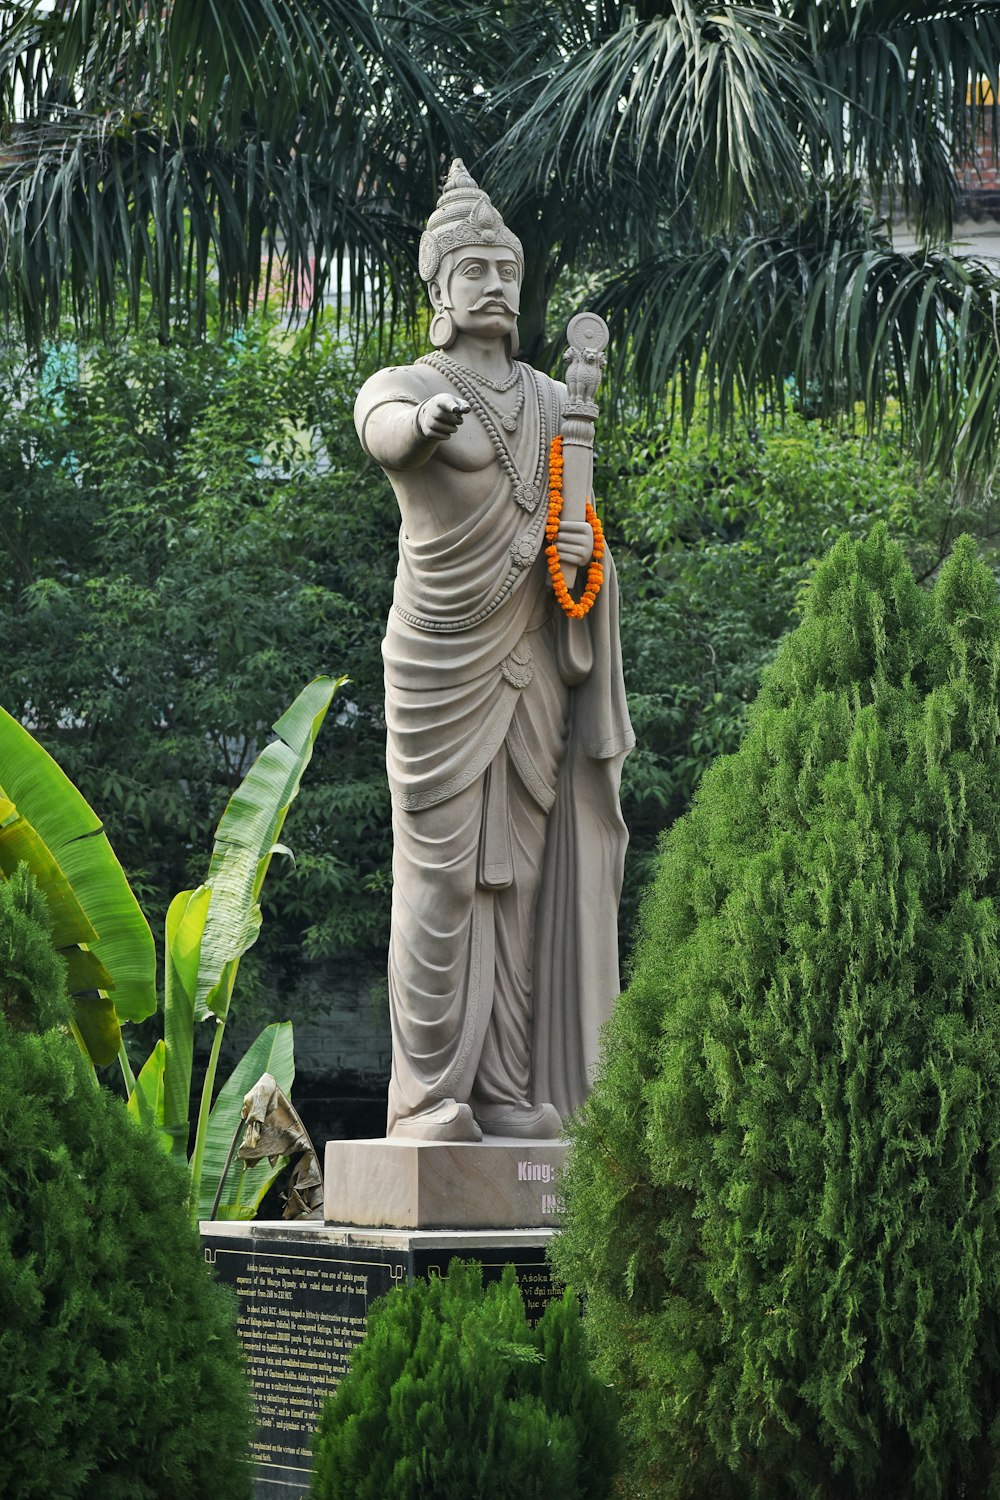 a statue of a person with a wreath around his neck